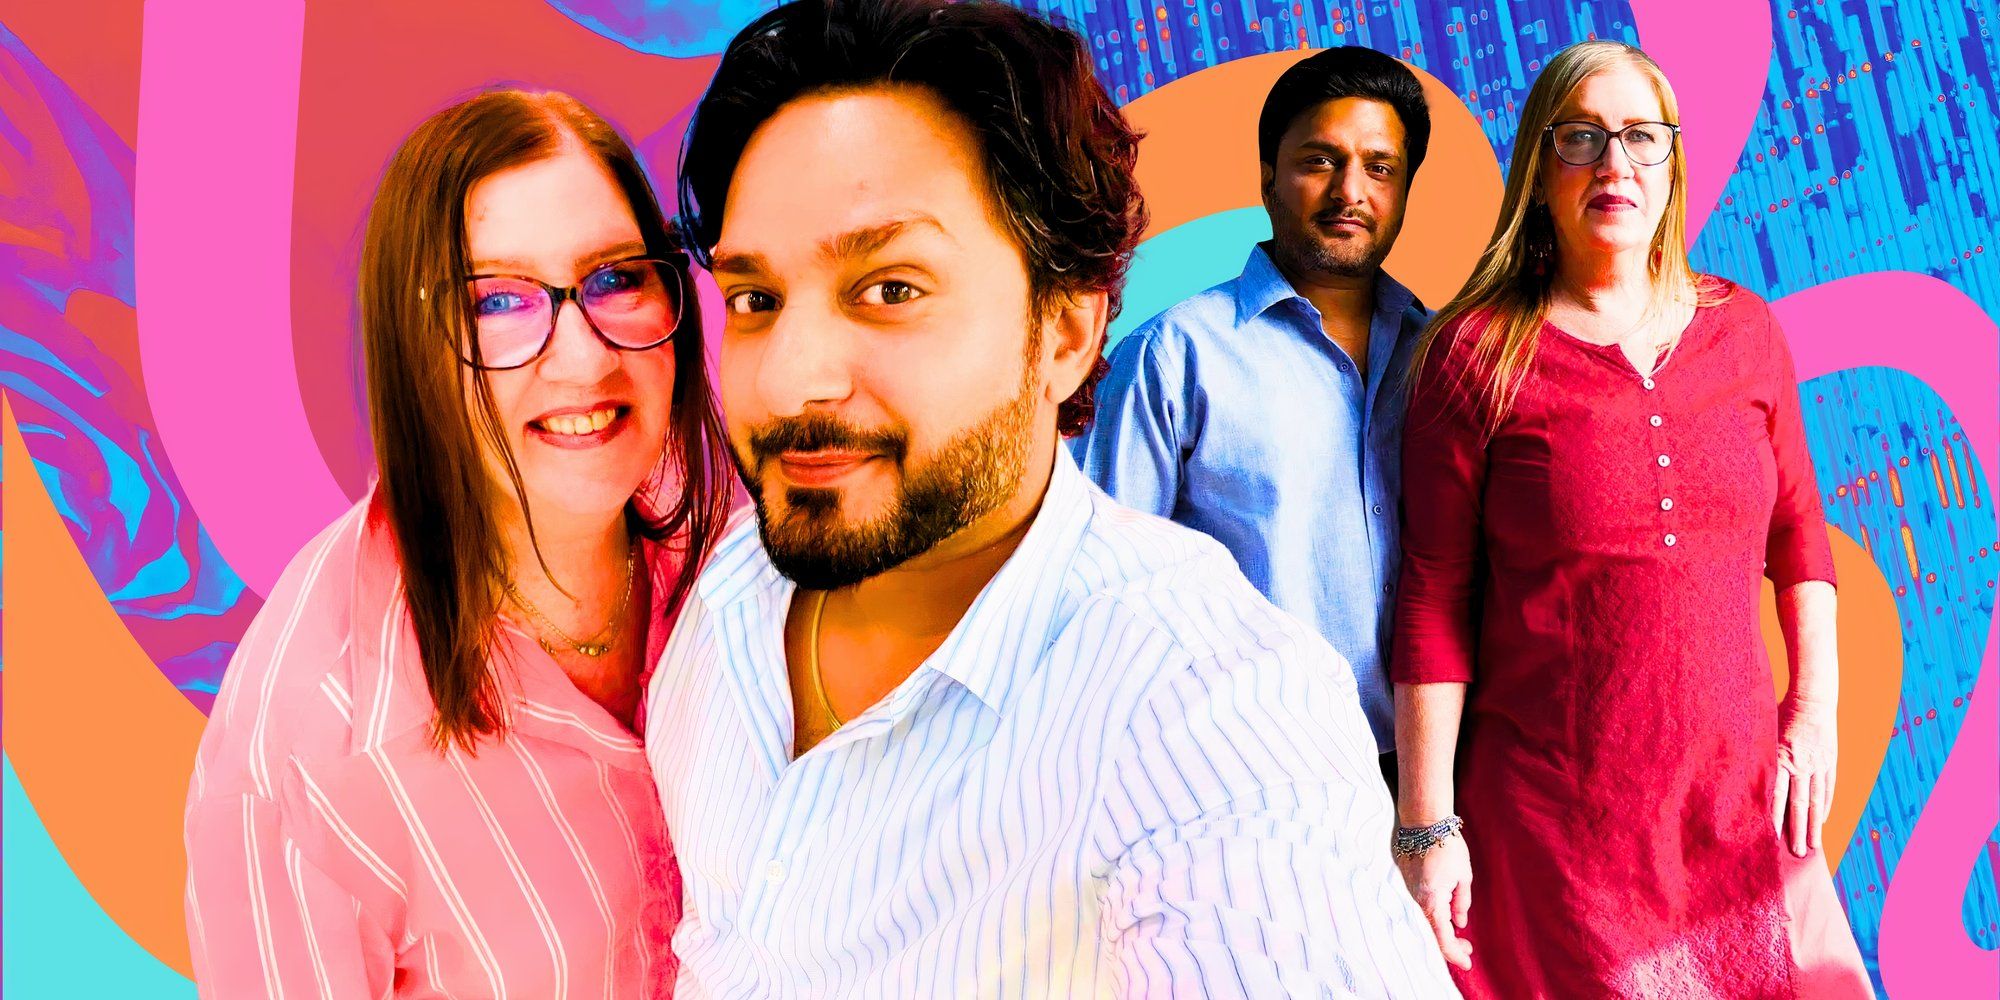 Sumit Singh & Jenny Slatten  montage on 90 day fiance  with colorful backgriund